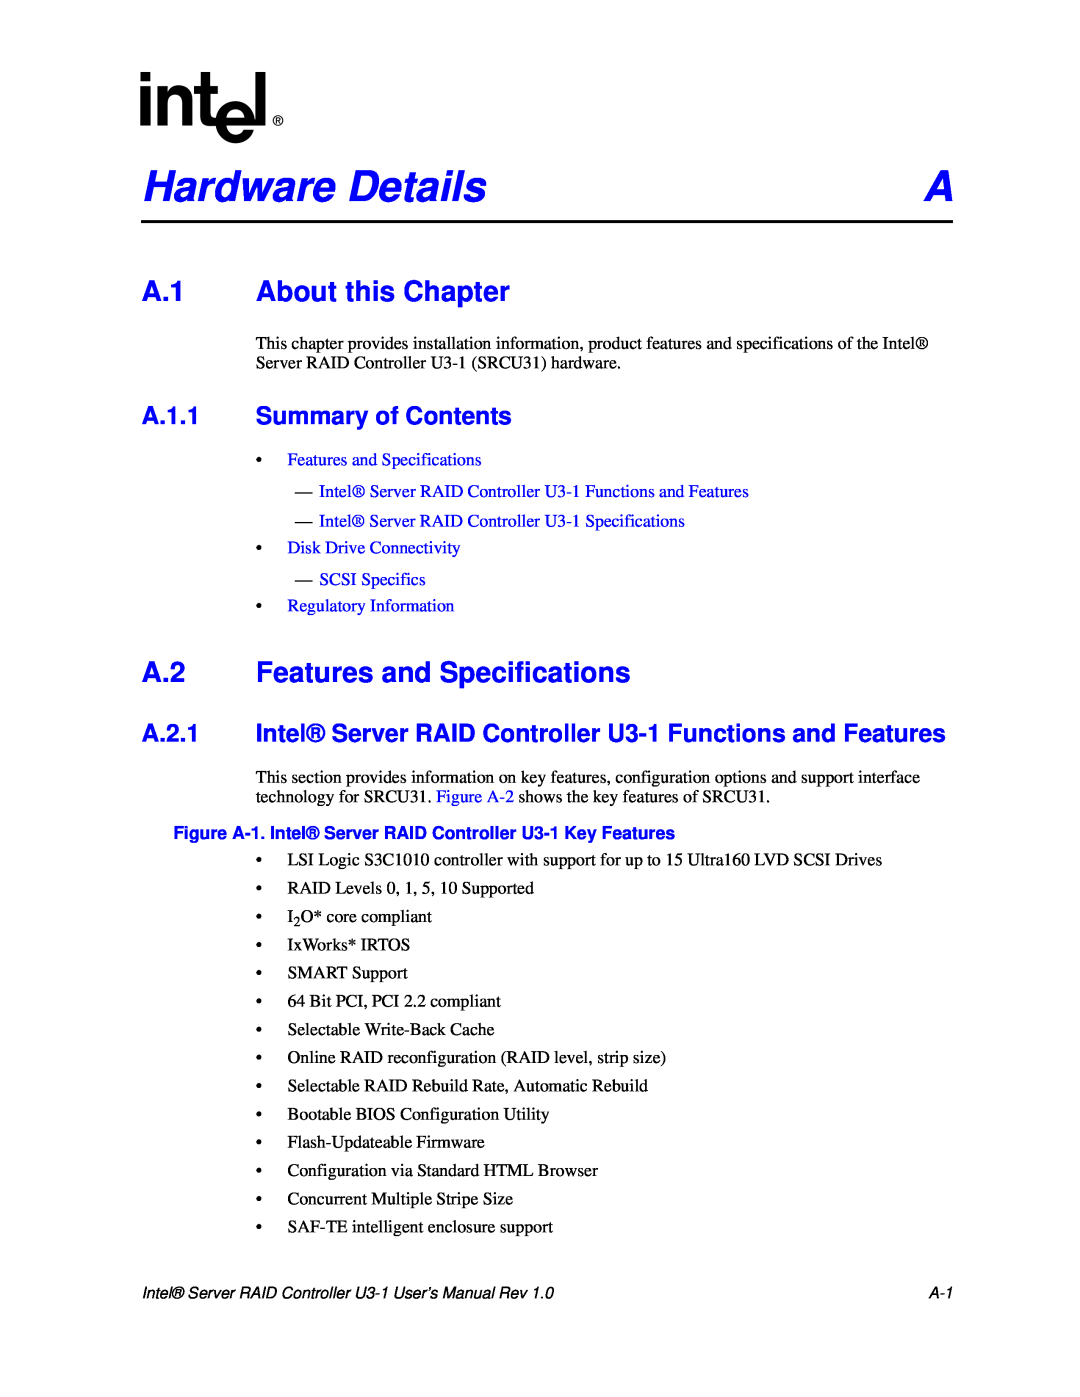 Intel SRCU31 user manual Hardware Details, A.1 About this Chapter, A.2 Features and Specifications 